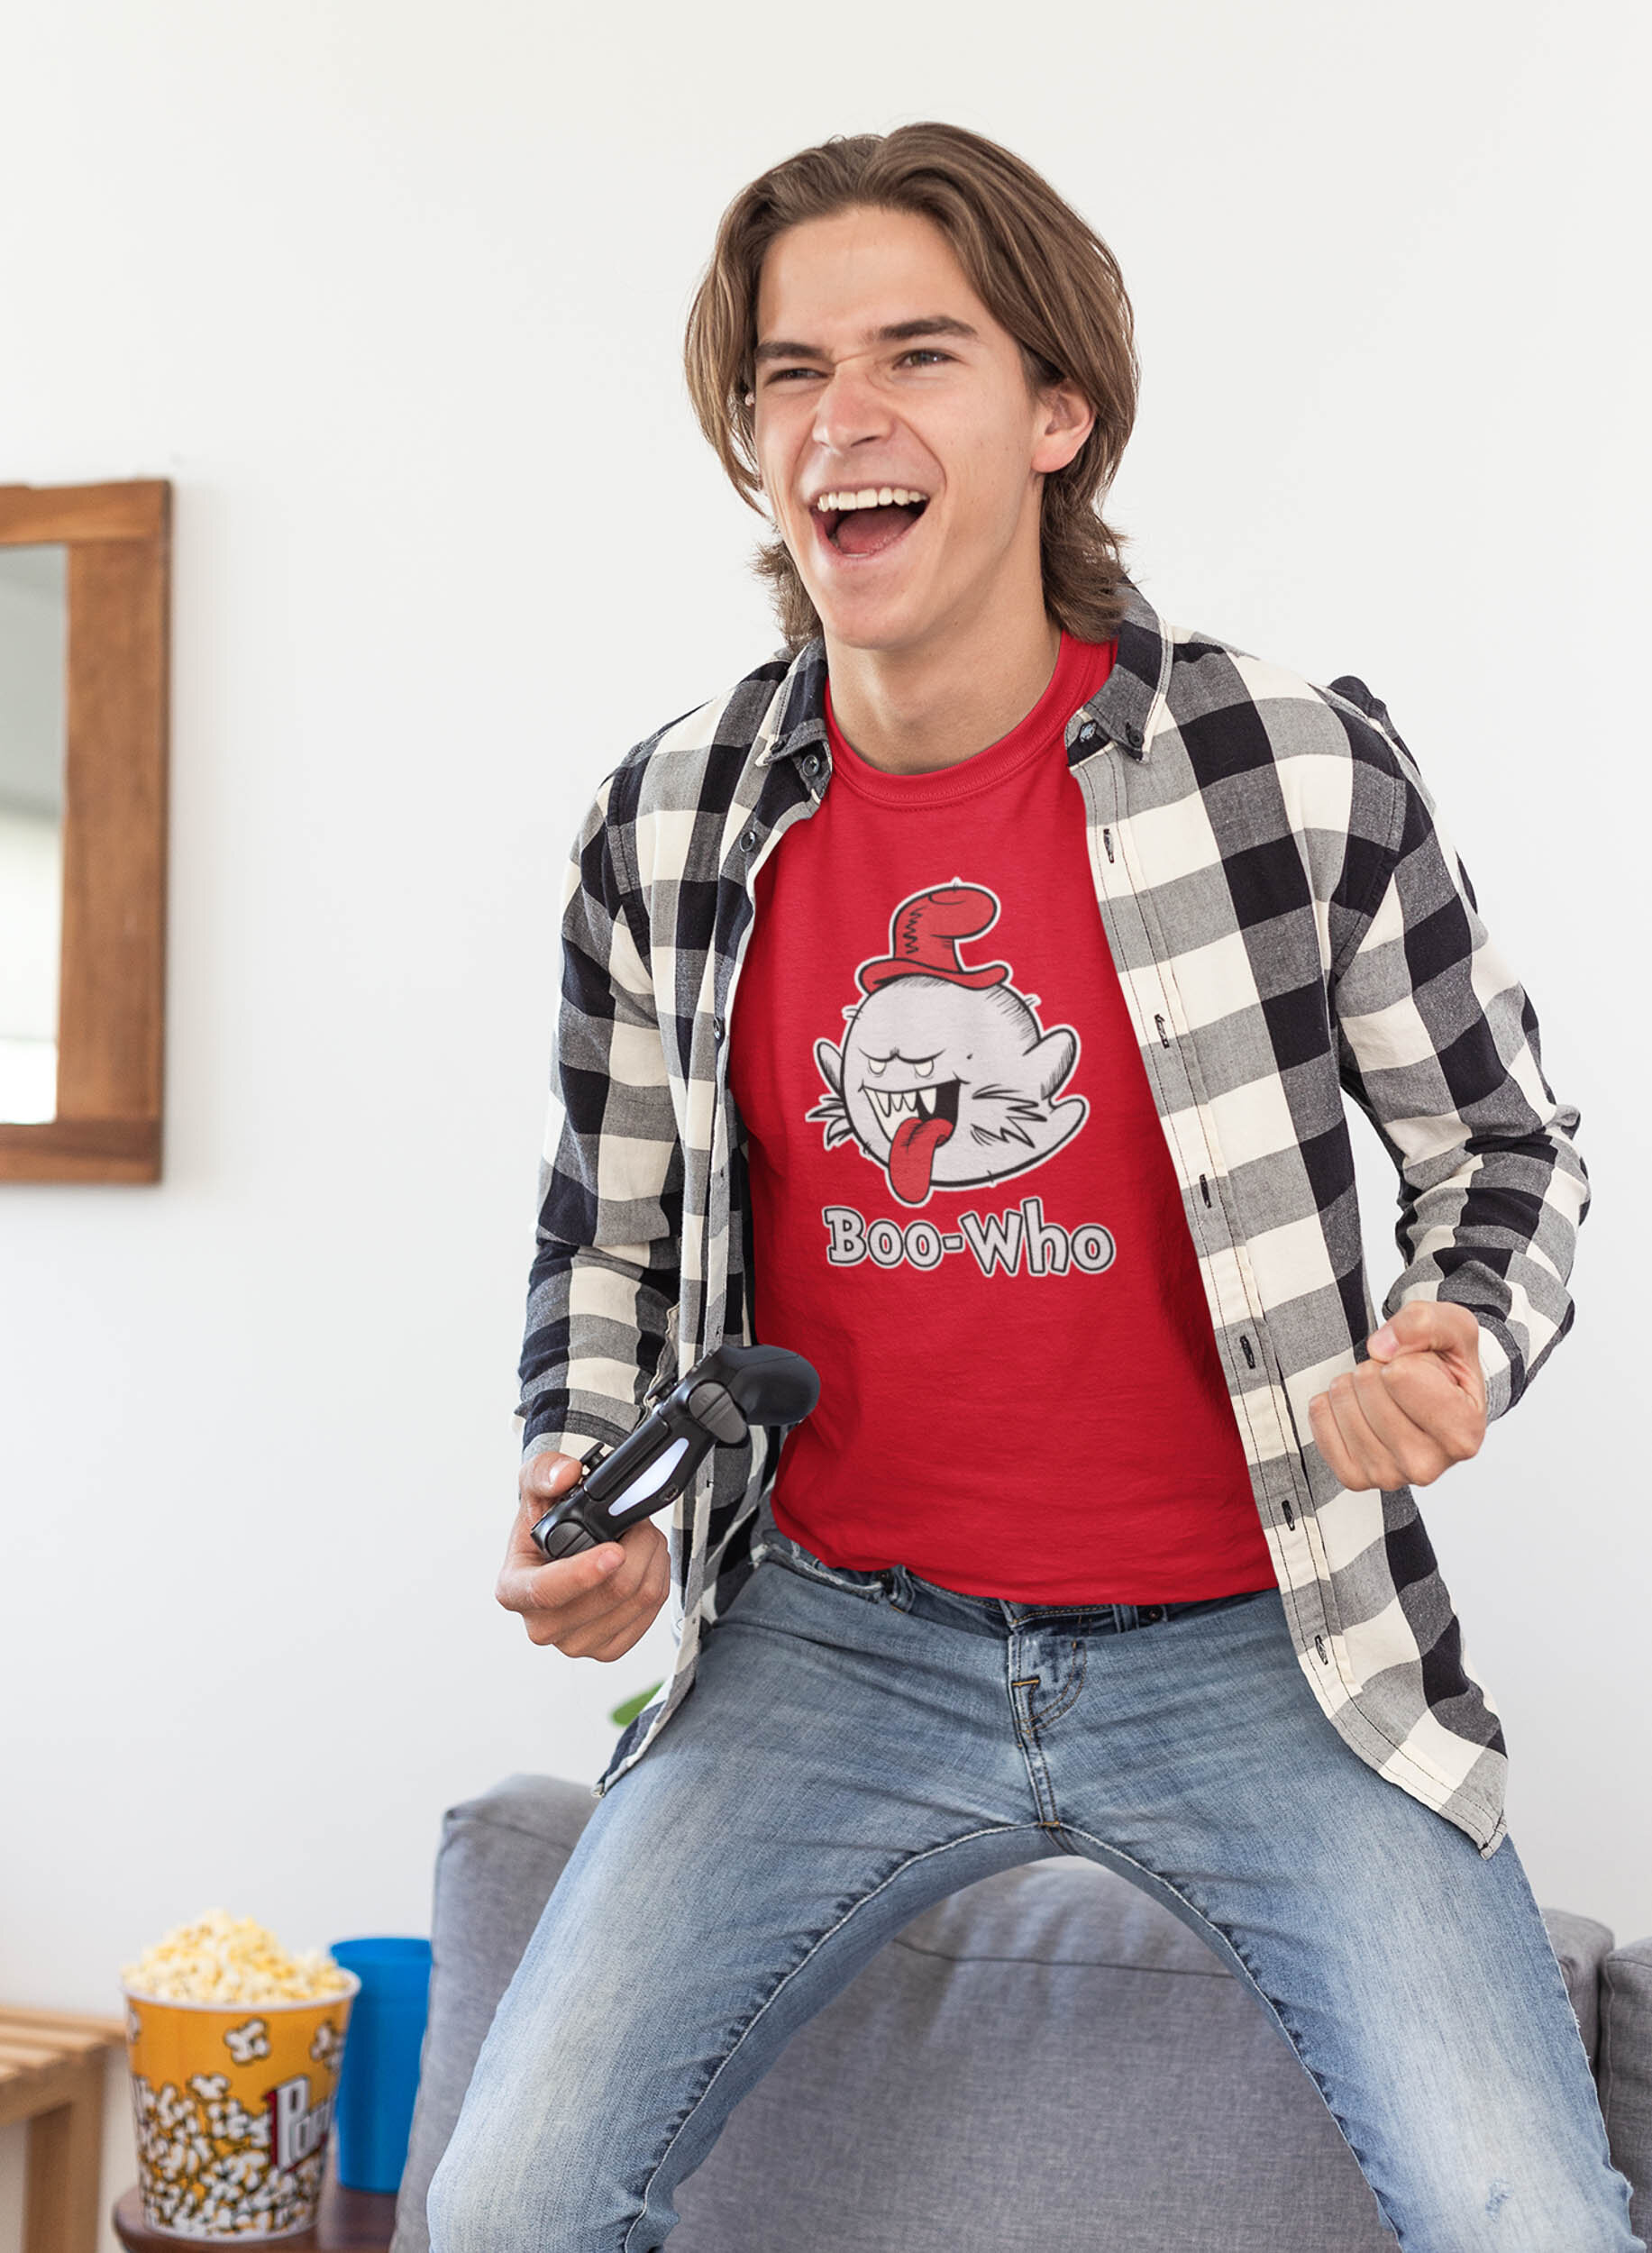 t-shirt-mockup-of-a-thrilled-gamer-standing-on-his-couch-26897.jpg